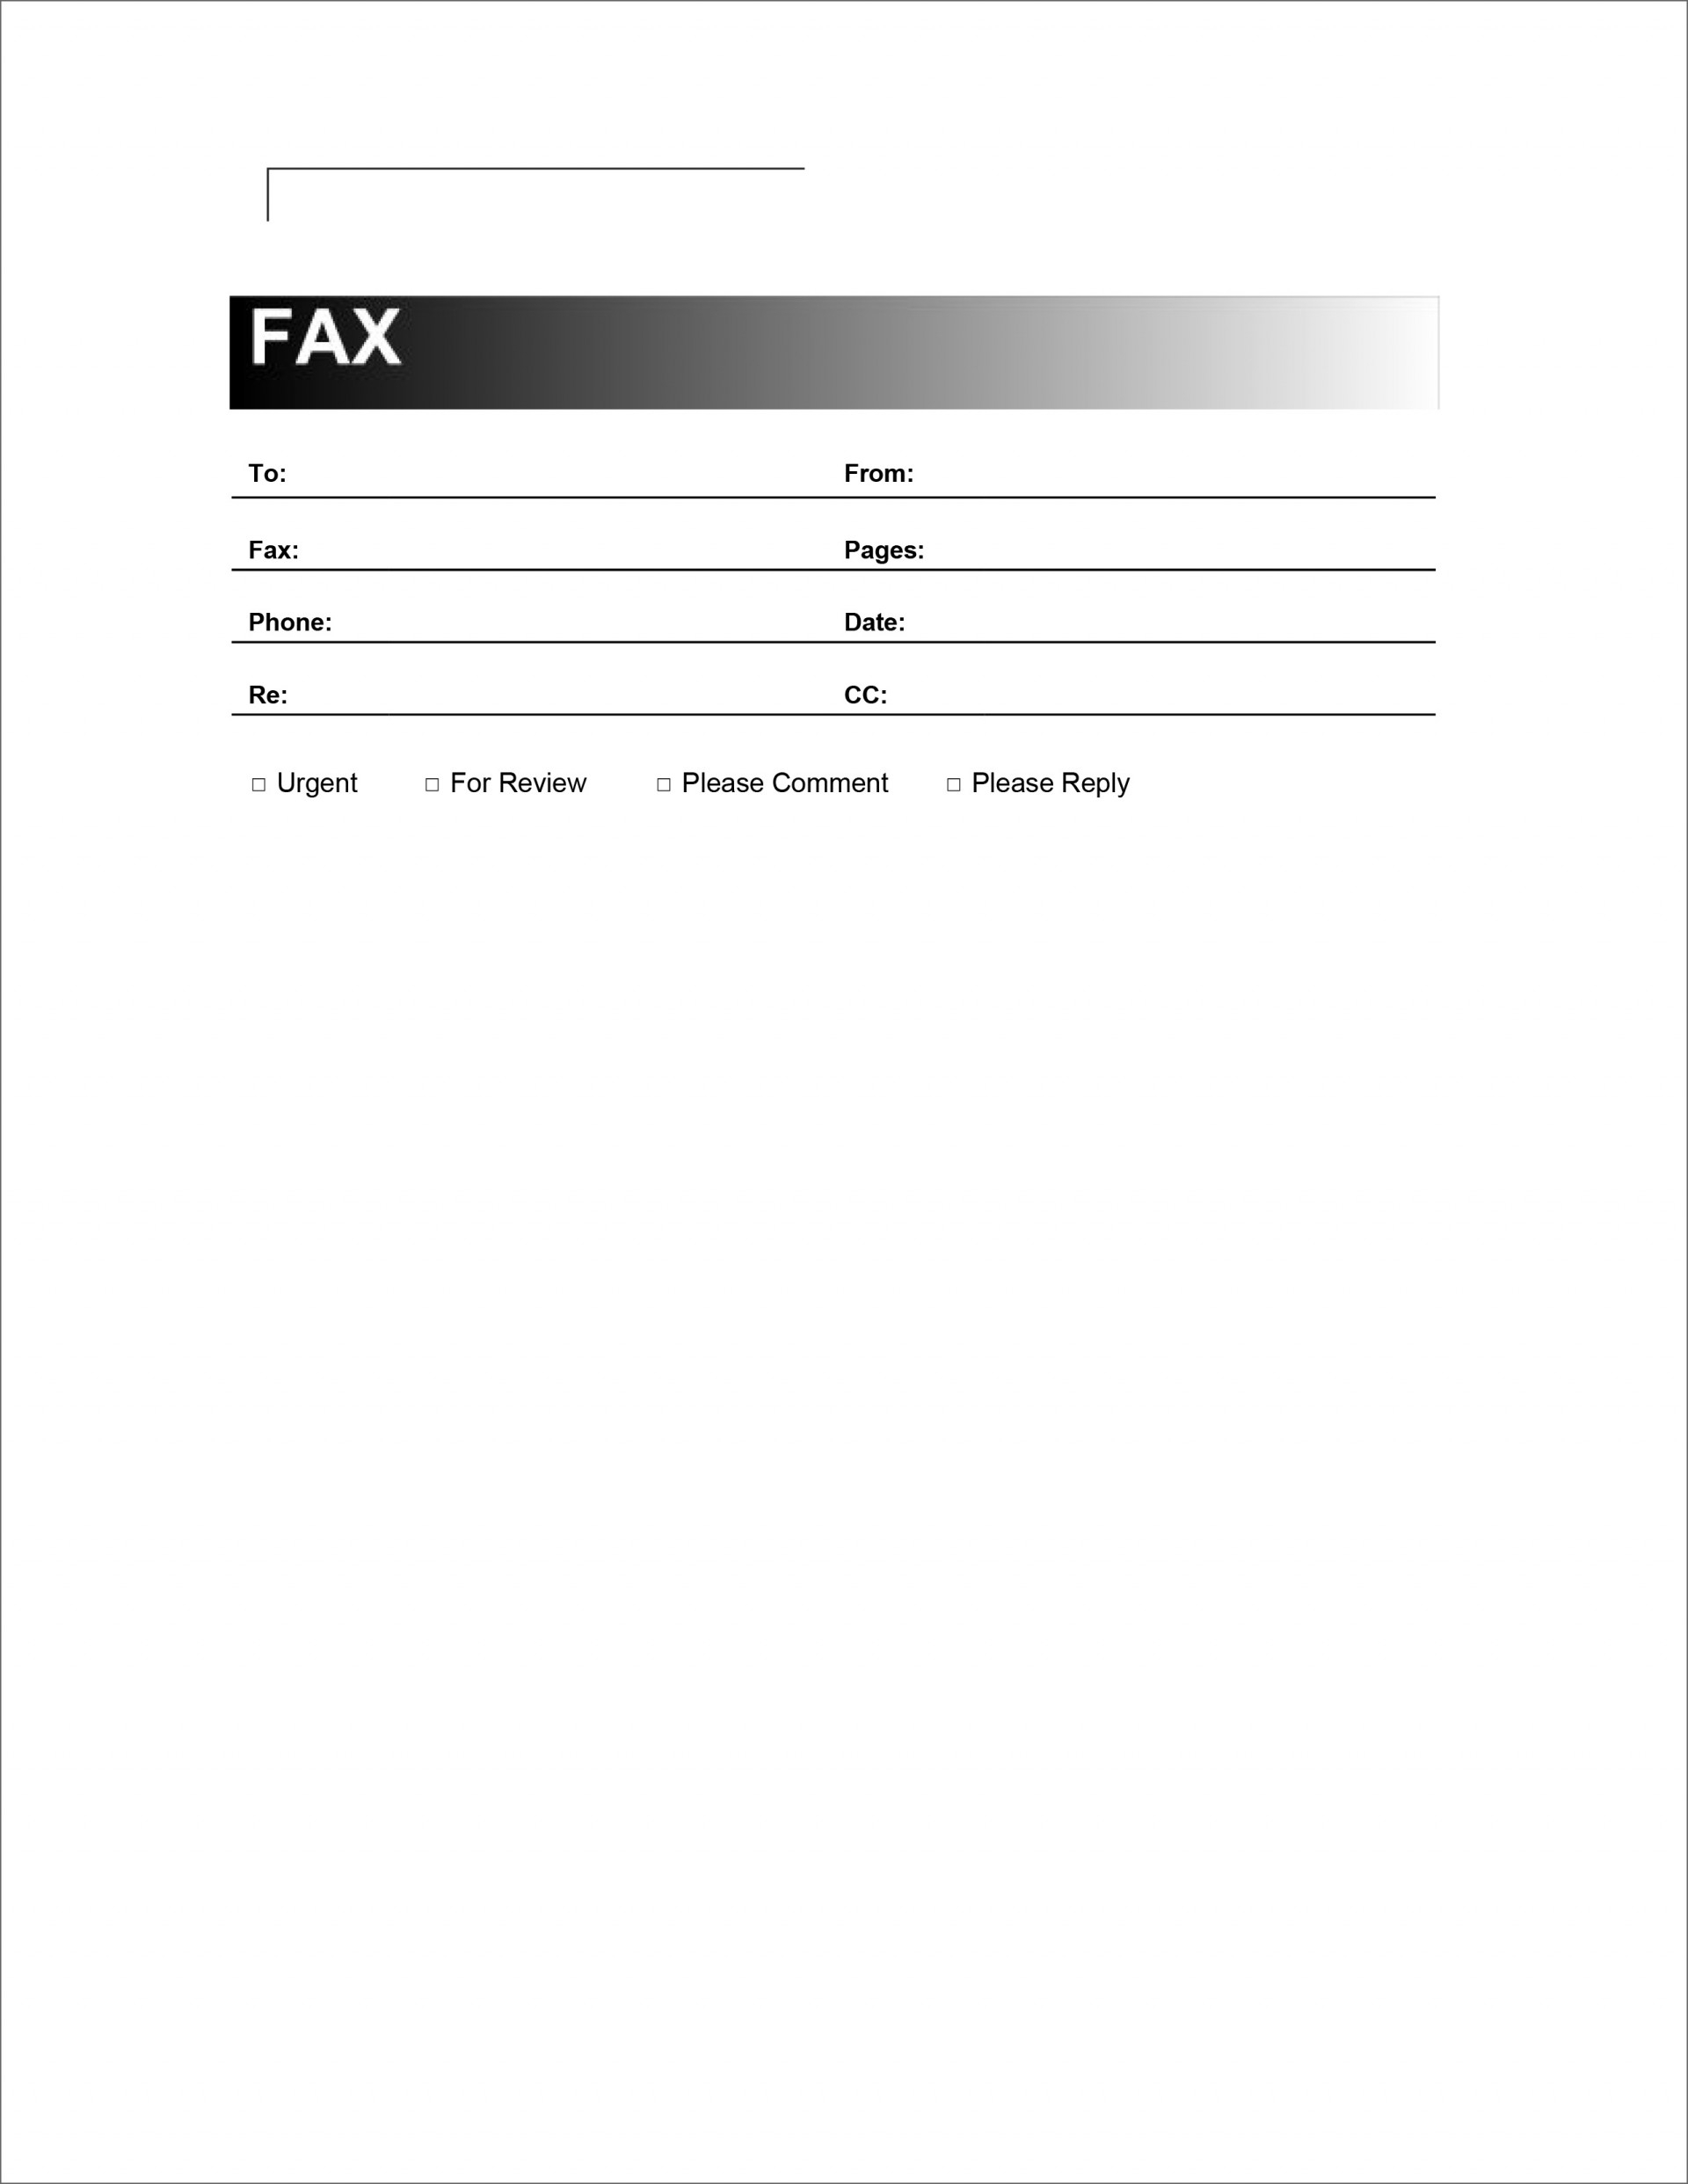 030 Fax Cover Sheet Template Ideas Simple Formidable Blank Within Fax Cover Sheet Template Word 2010